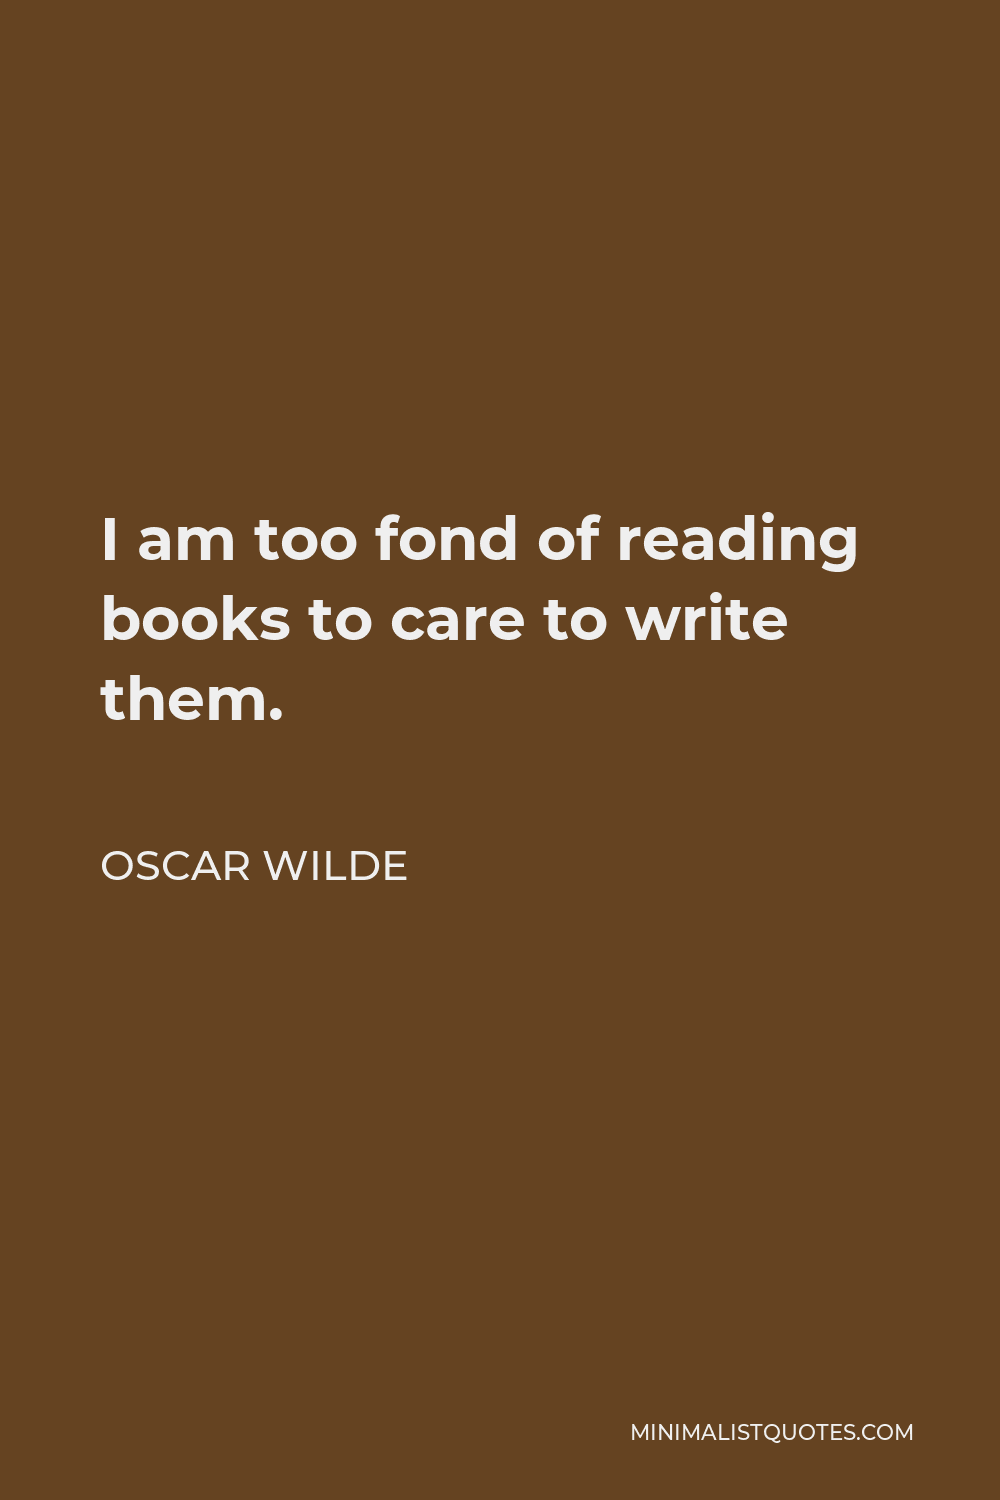 Oscar Wilde Quote - I am too fond of reading books to care to write them.